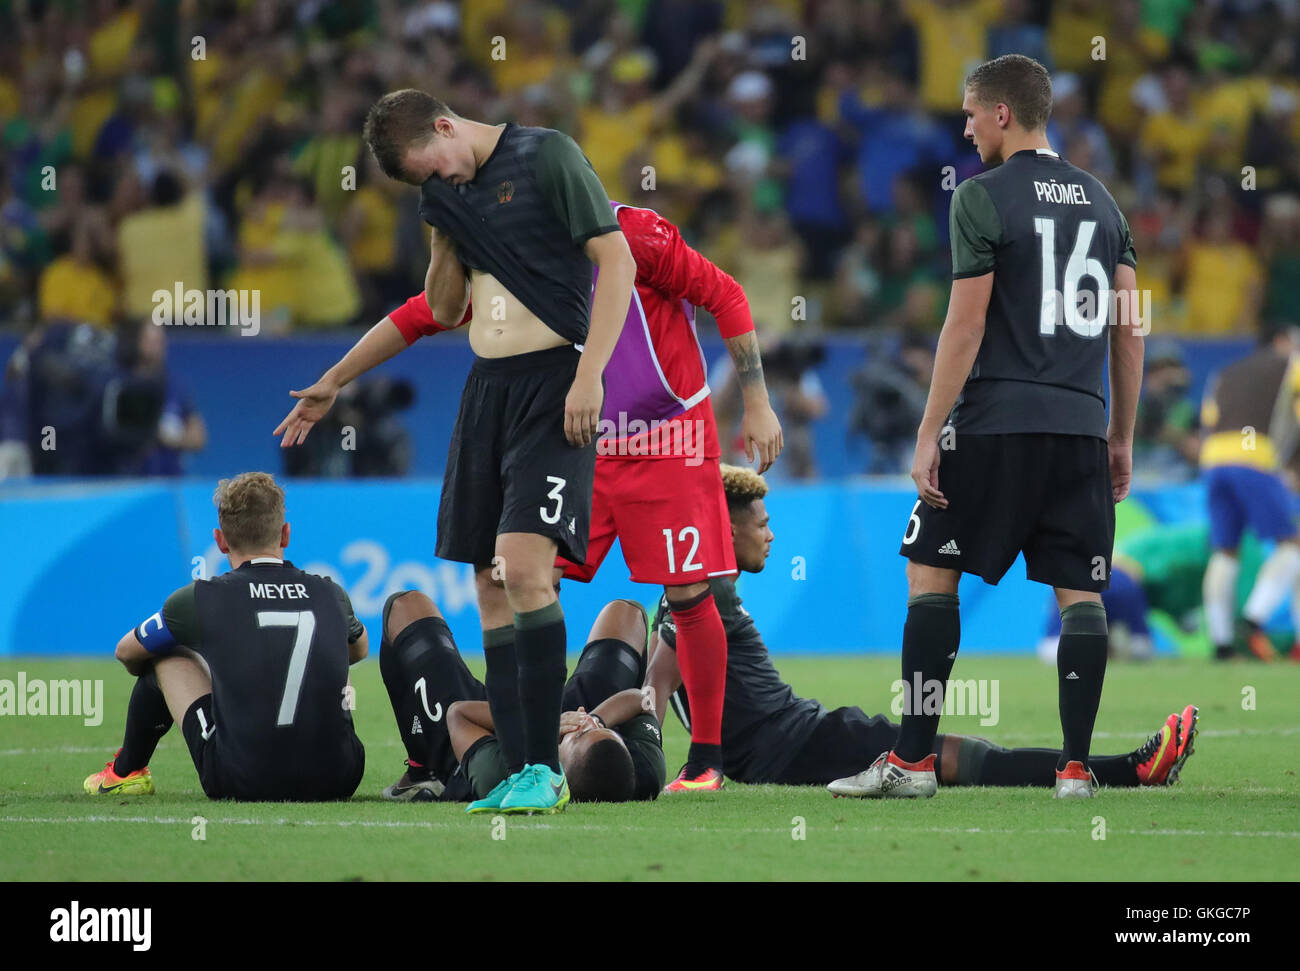 Rio de Janeiro, Brazil. 20th Aug, 2016. (L-R) Maximilian Meyer, Jeremy Toljan, Lukas Klostermann, Jannik Huth, Serge Gnarby, Grischa Proemel of Germany after losing the penalty shoot-out of the Men's soccer Gold Medal Match between Brazil and Germany during the Rio 2016 Olympic Games at the Maracana in Rio de Janeiro, Brazil, 20 August 2016. Photo: Friso Gentsch/dpa/Alamy Live News Stock Photo